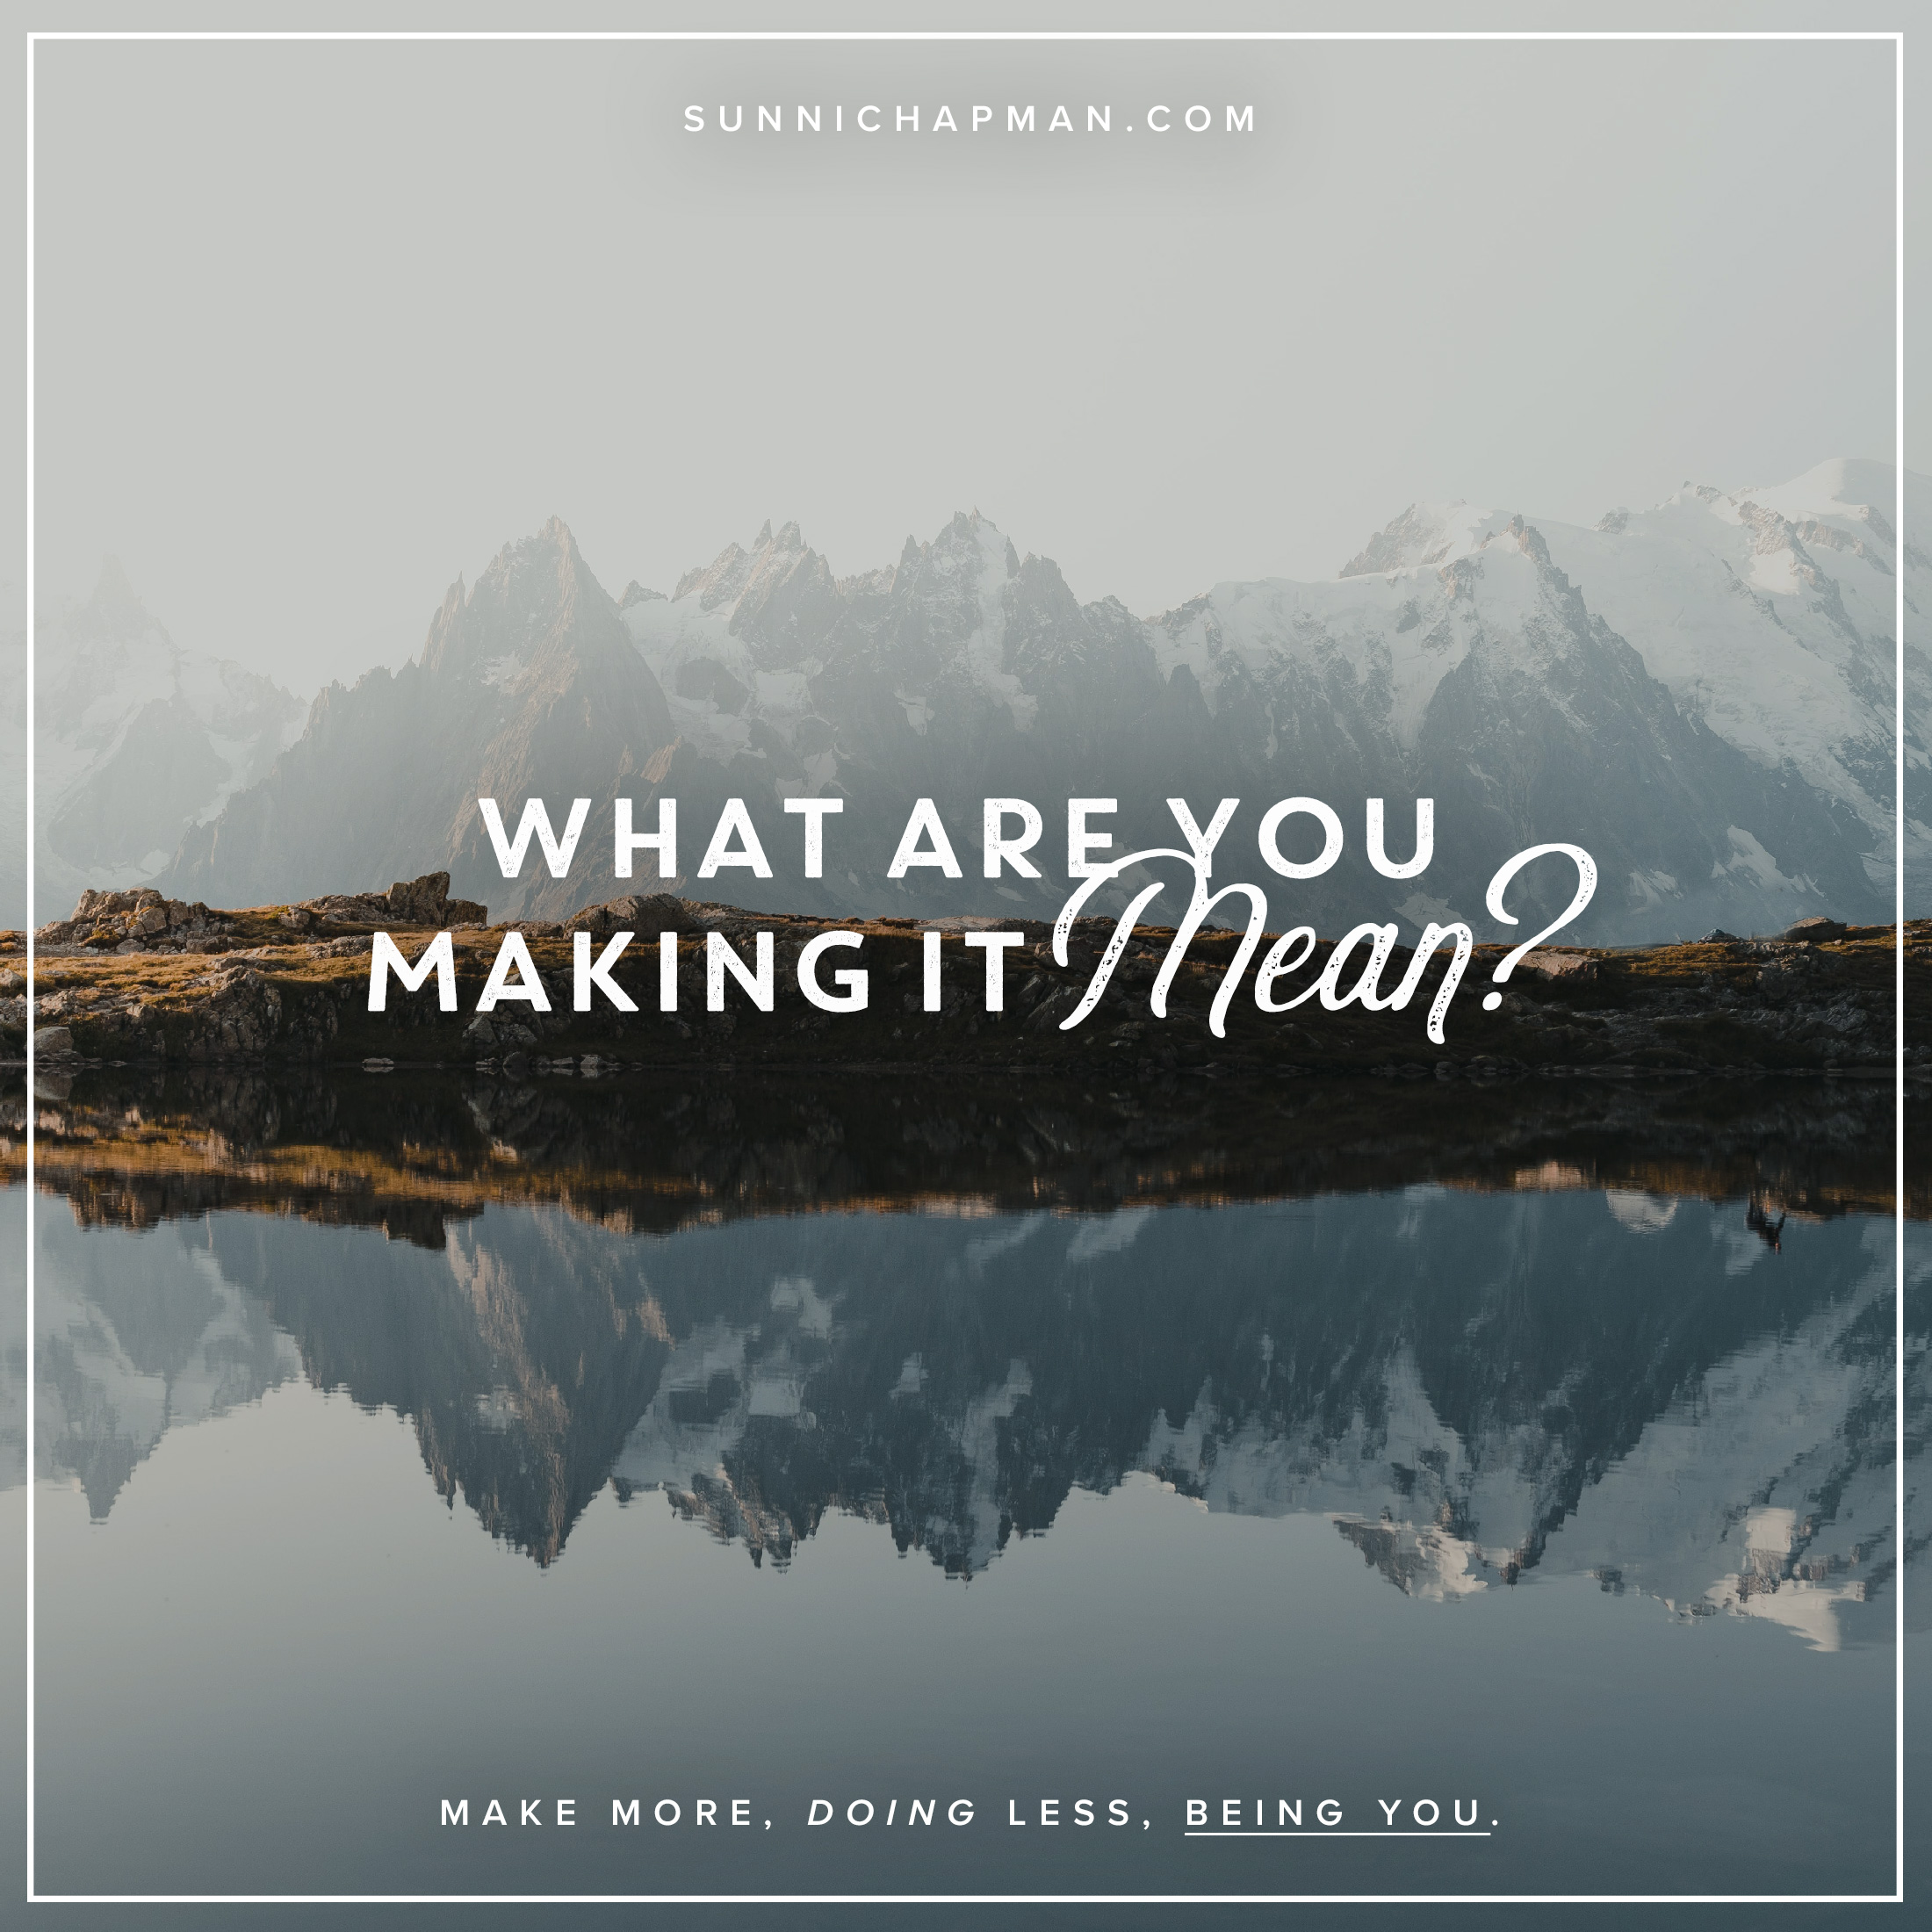 A view of the mountains covered with snow, in front of them is a lake and the text: What Are You Making It Mean